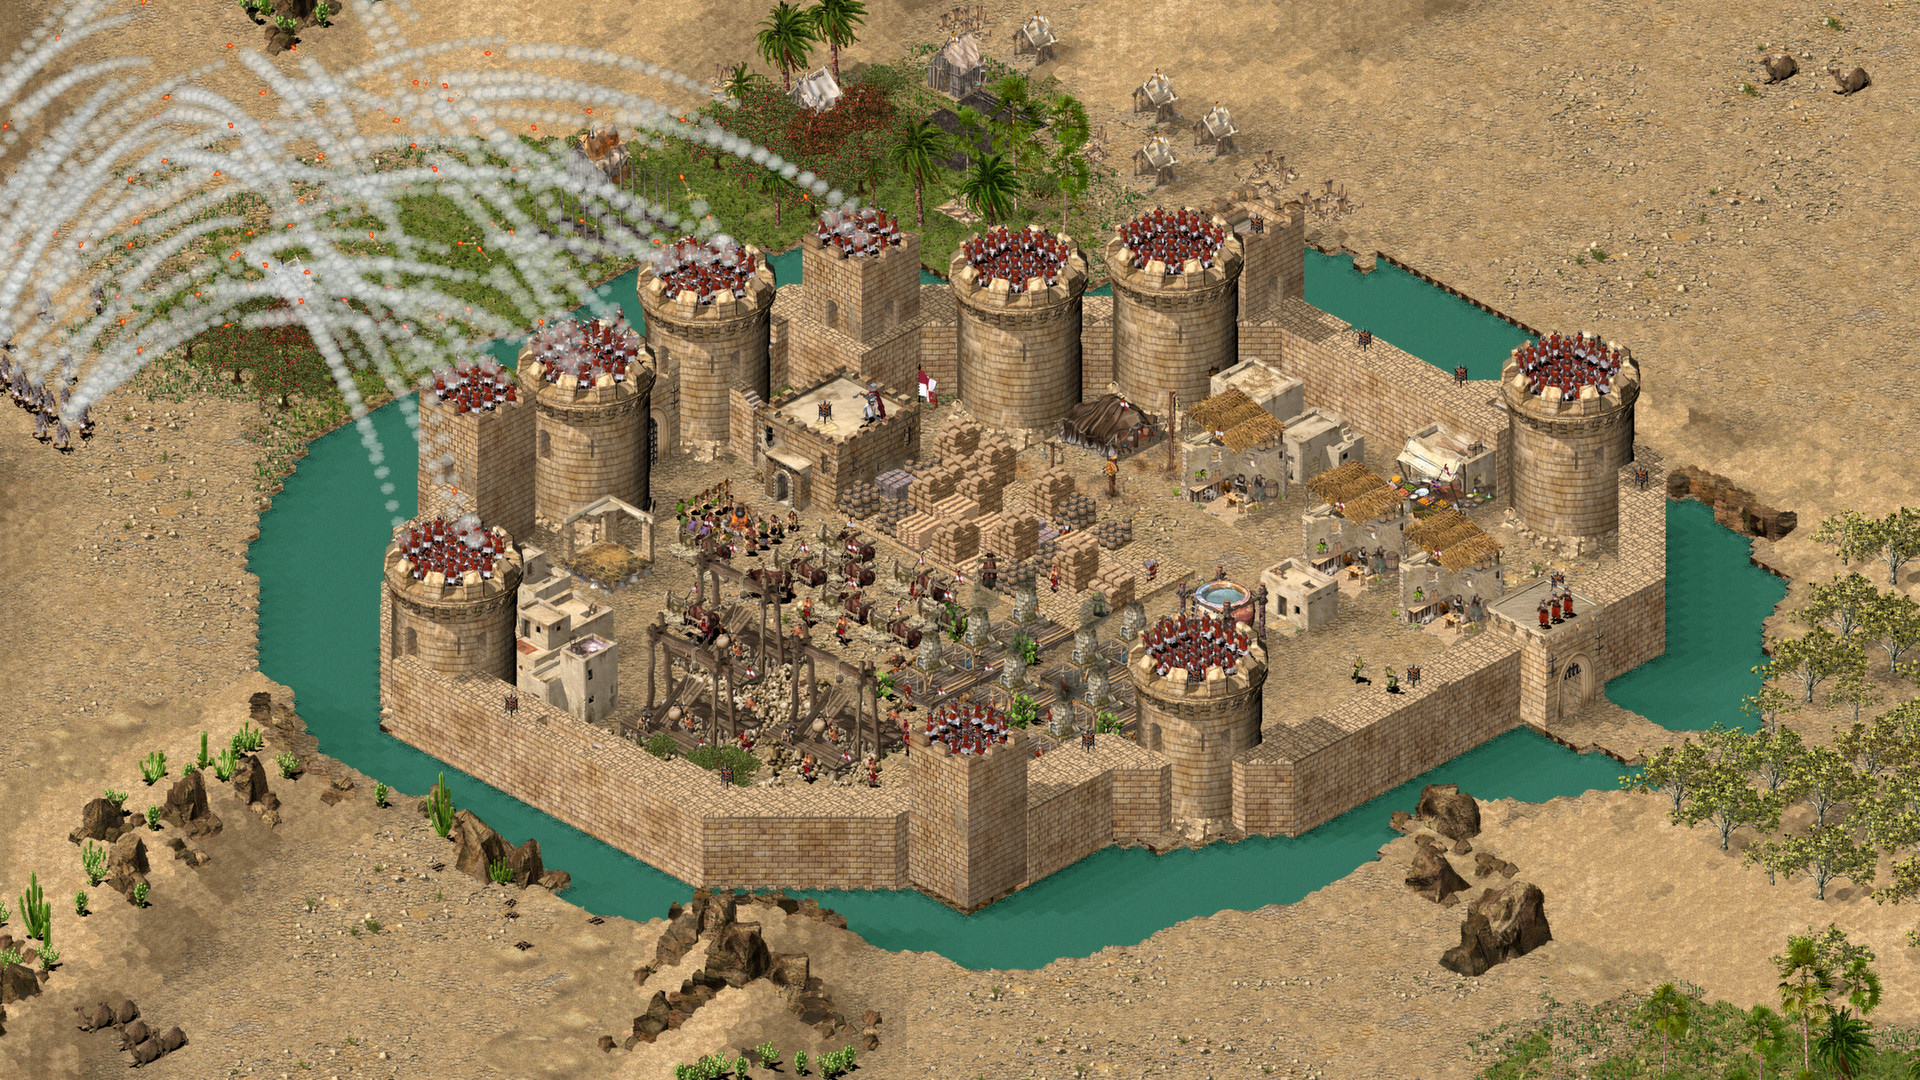 stronghold 2 game free download